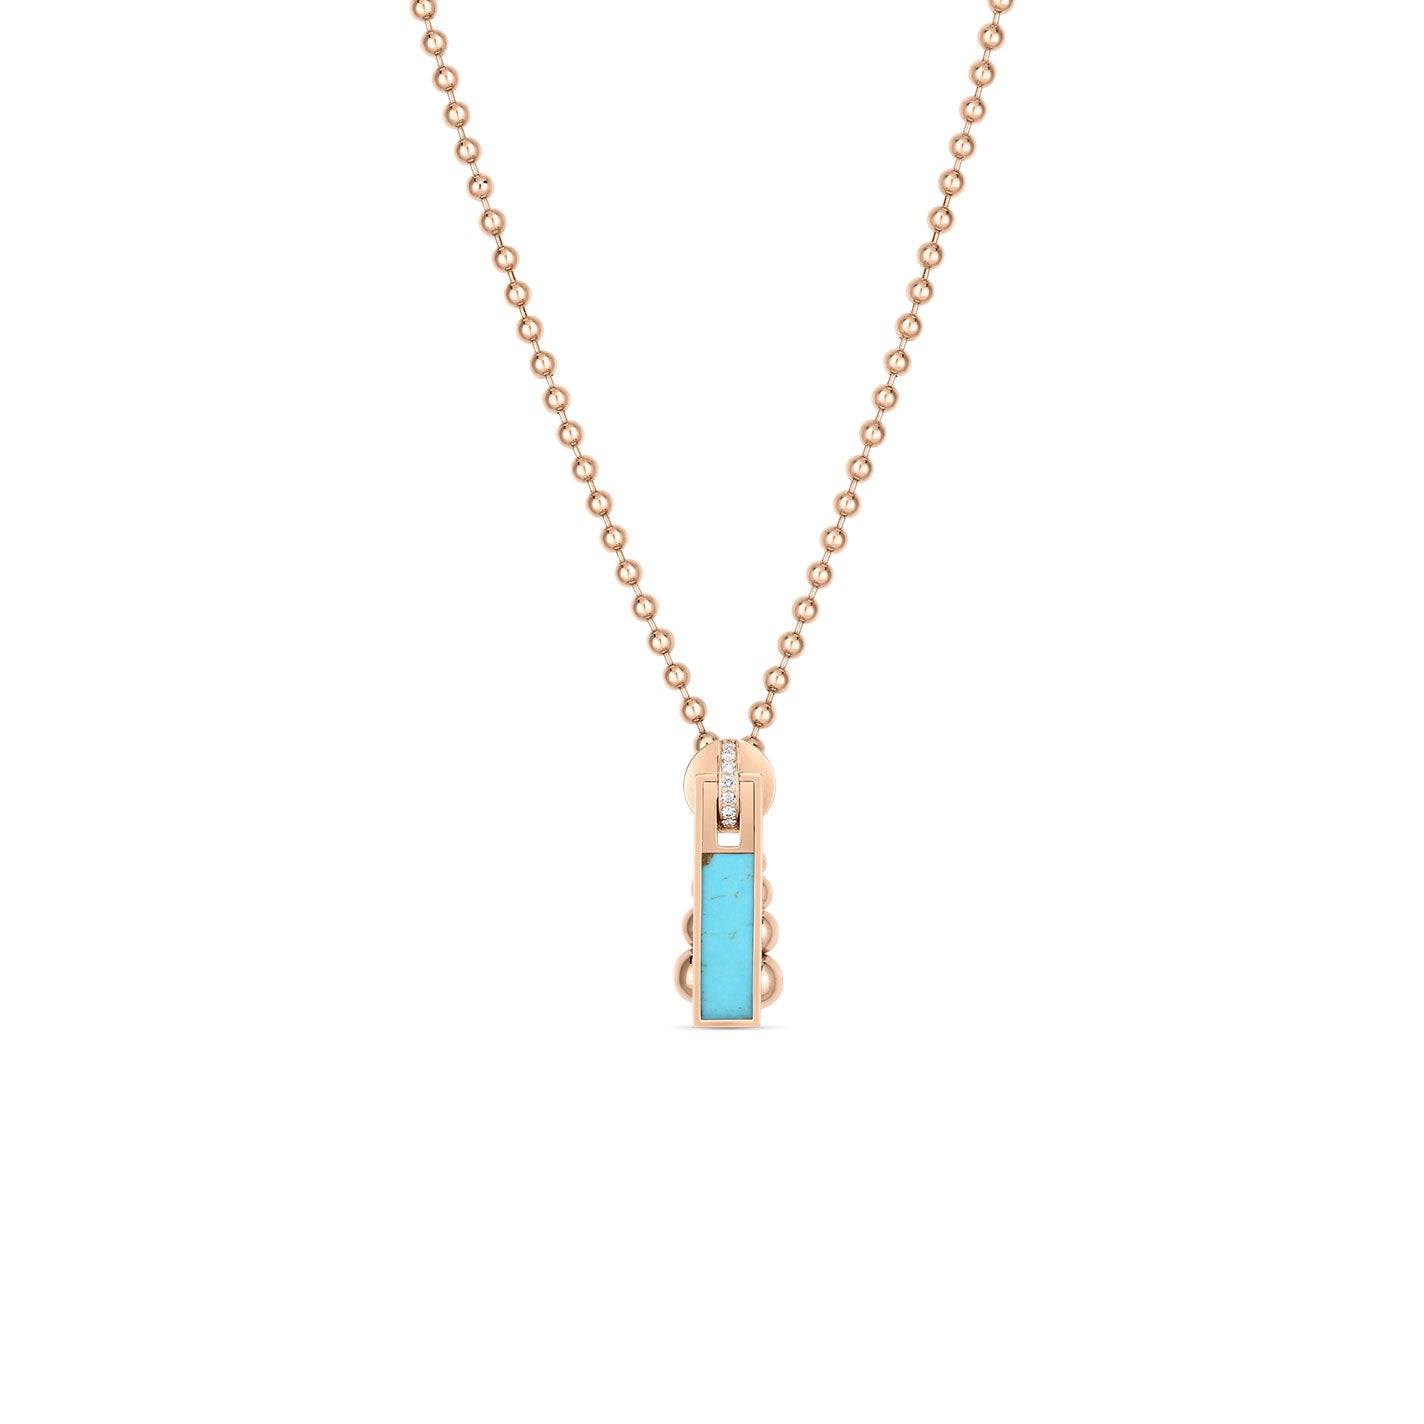 Roberto Coin Art Deco 18K Rose Gold Turquoise and Diamond Zipper Necklace Pendant